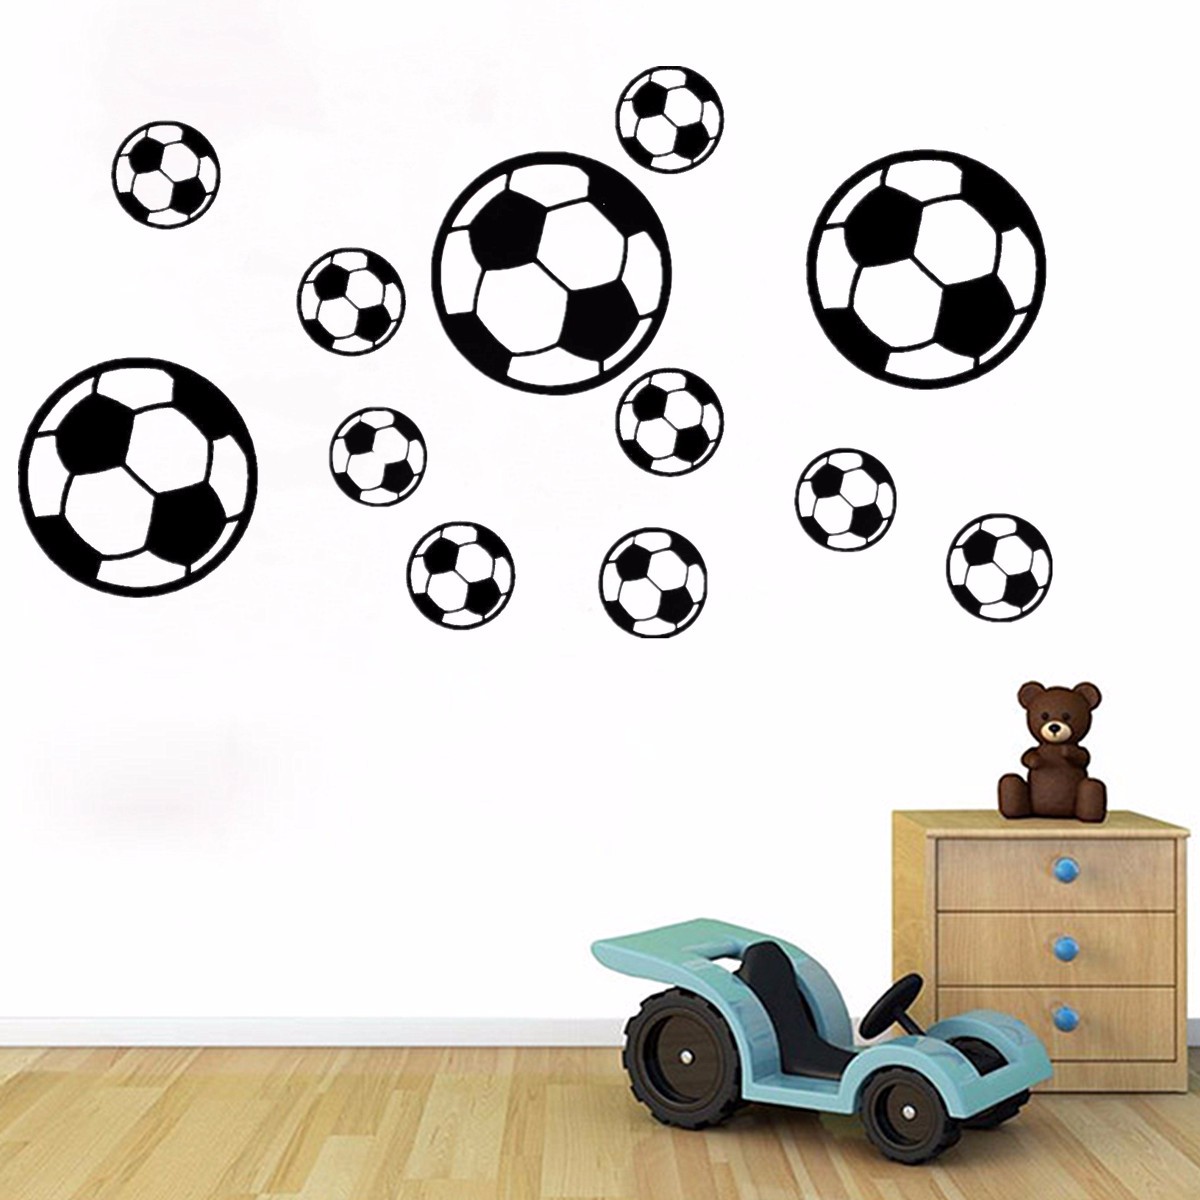 12PcsSet-Football-Soccer-Wall-Stickers-Children-Nursery-Kids-Room-Decals-Gift-Home-Decorations-1470248-6